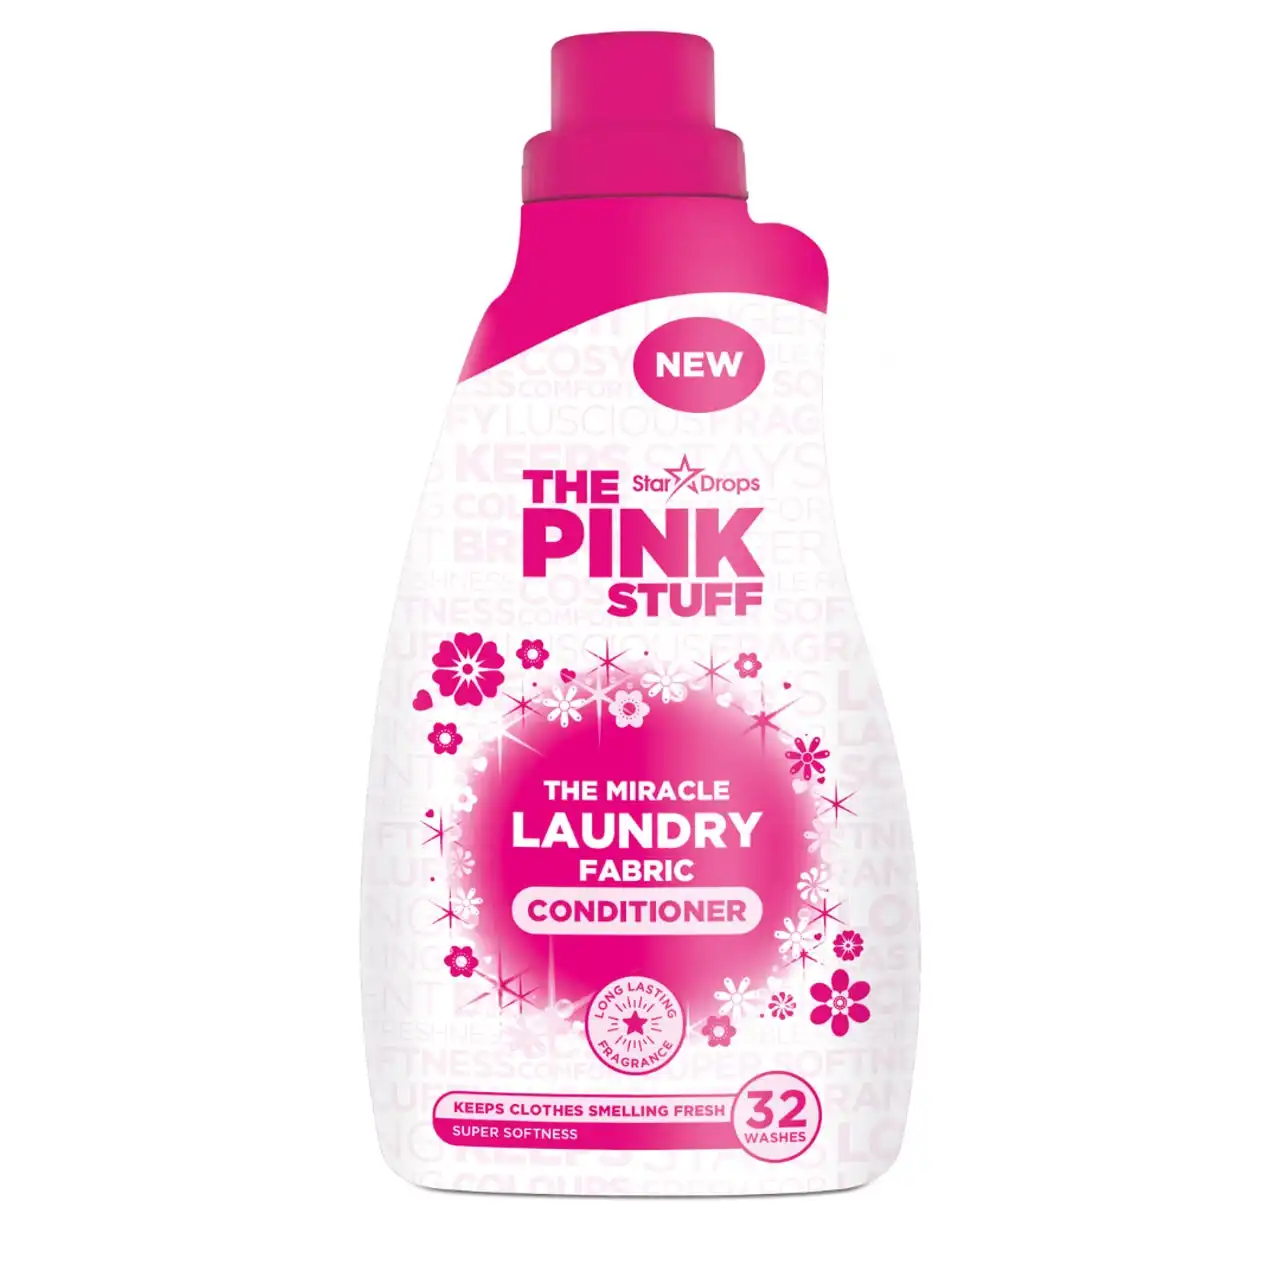 The Pink Stuff - The Miracle Laundry Fabric Conditioner (960ml)